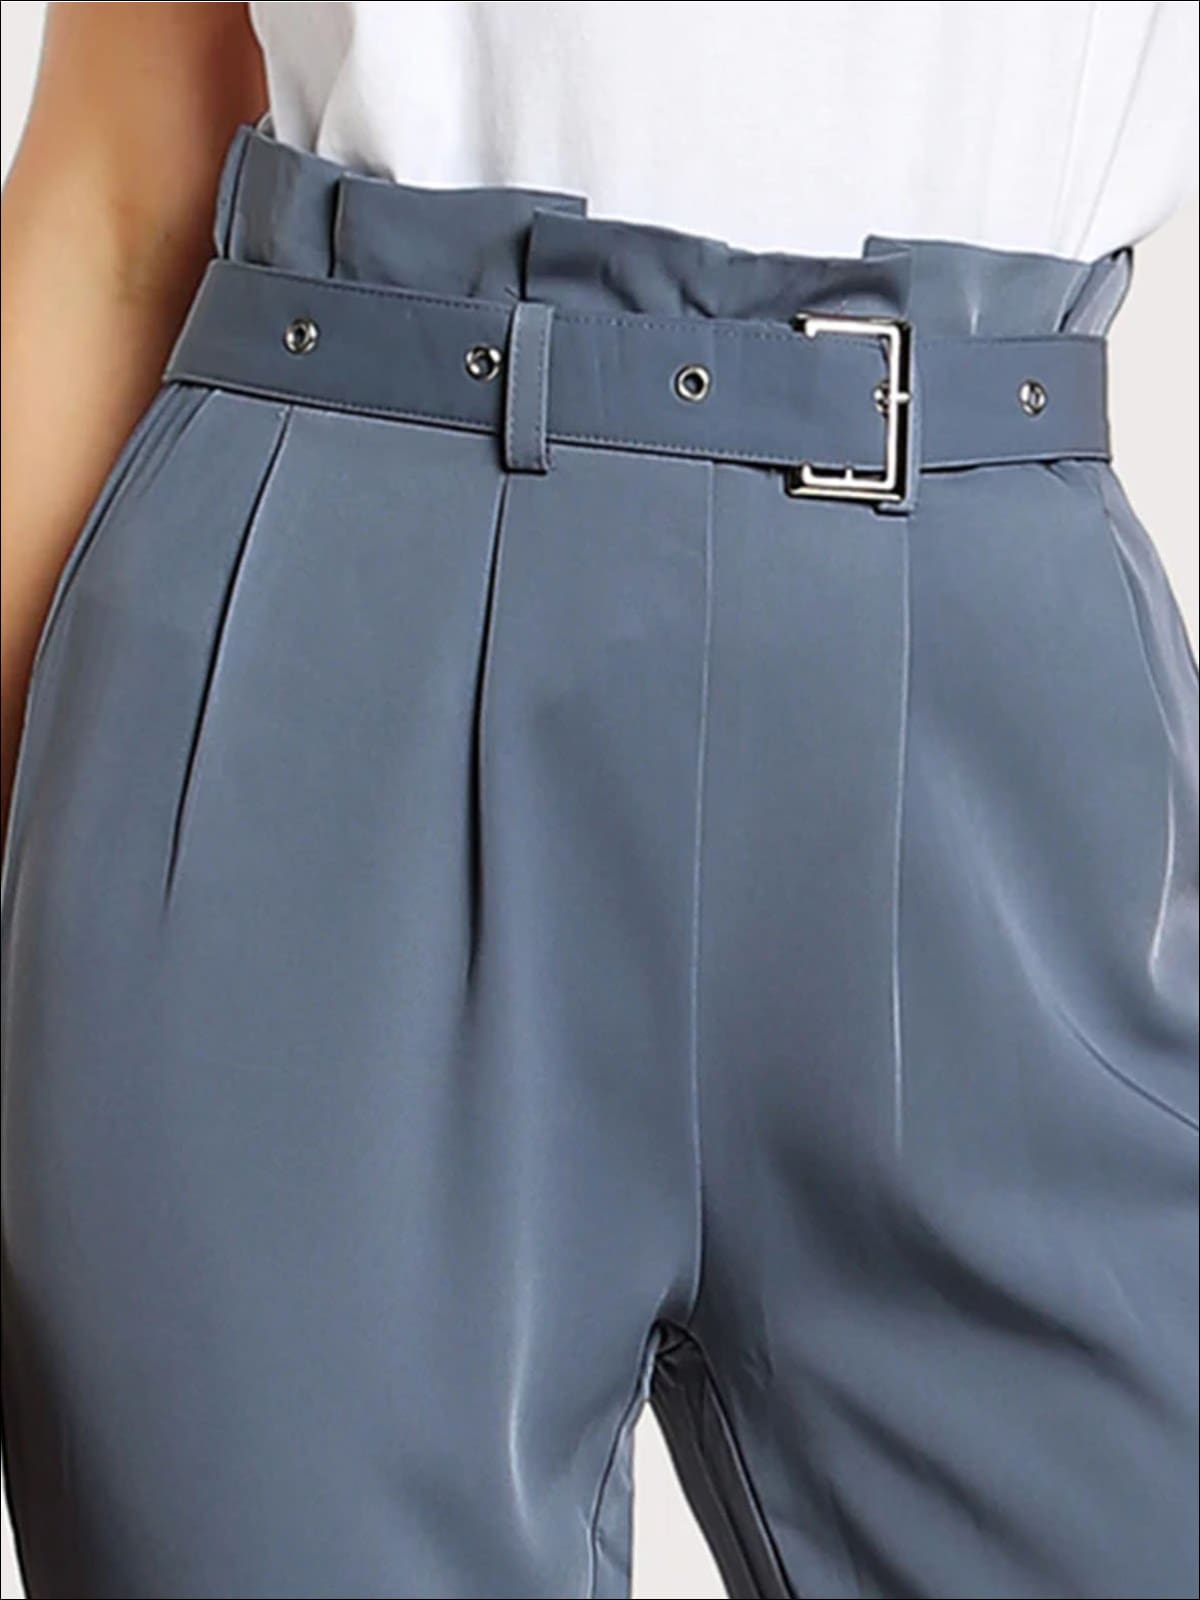 Womens Pleated Tailored Pants With Buckle Belt - Womens Bottoms